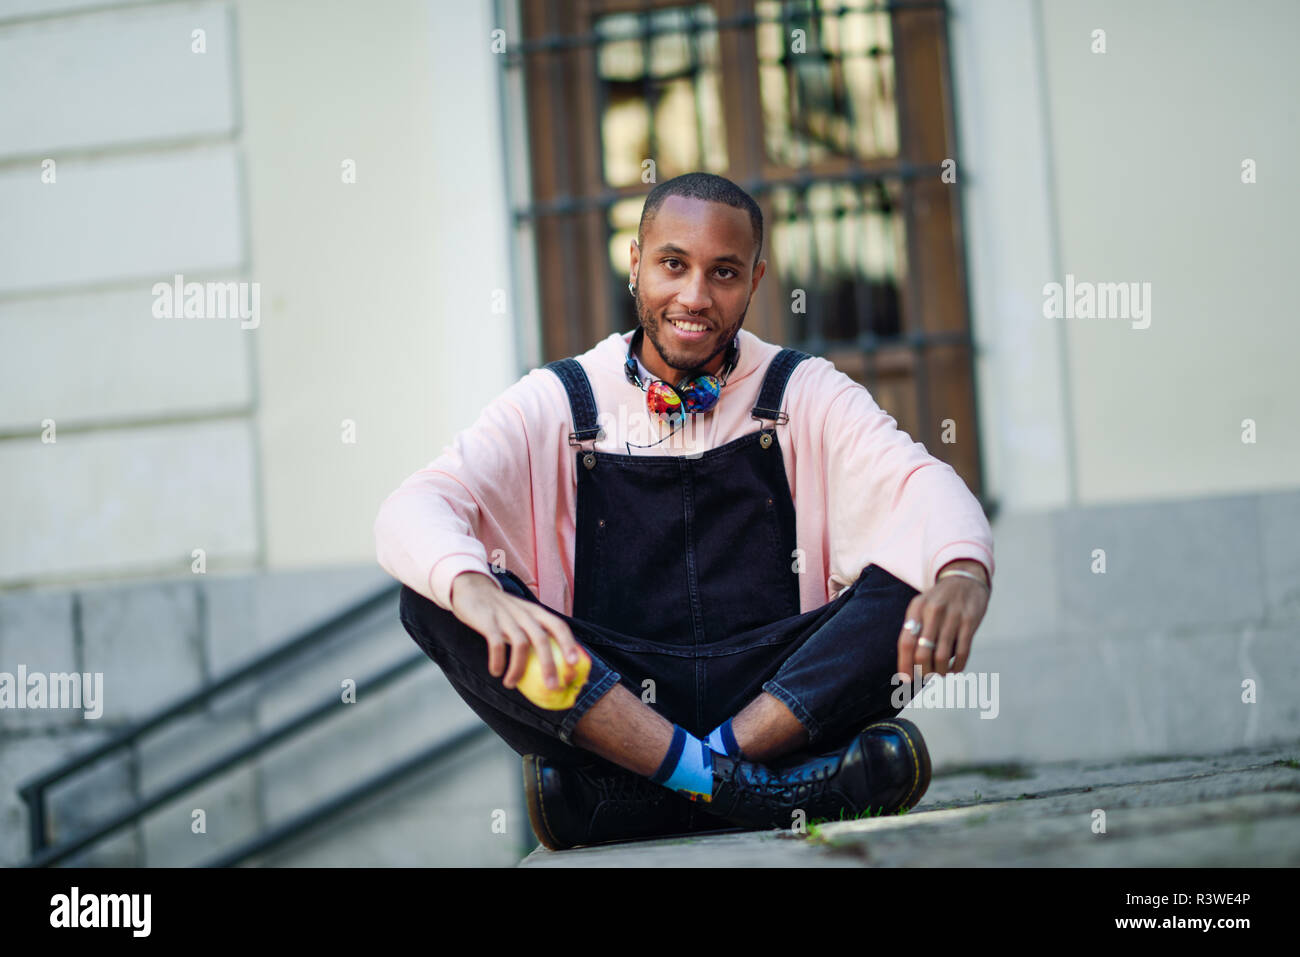 Young black man eating an apple sitting on urban steps. Lifestyle concept. Stock Photo